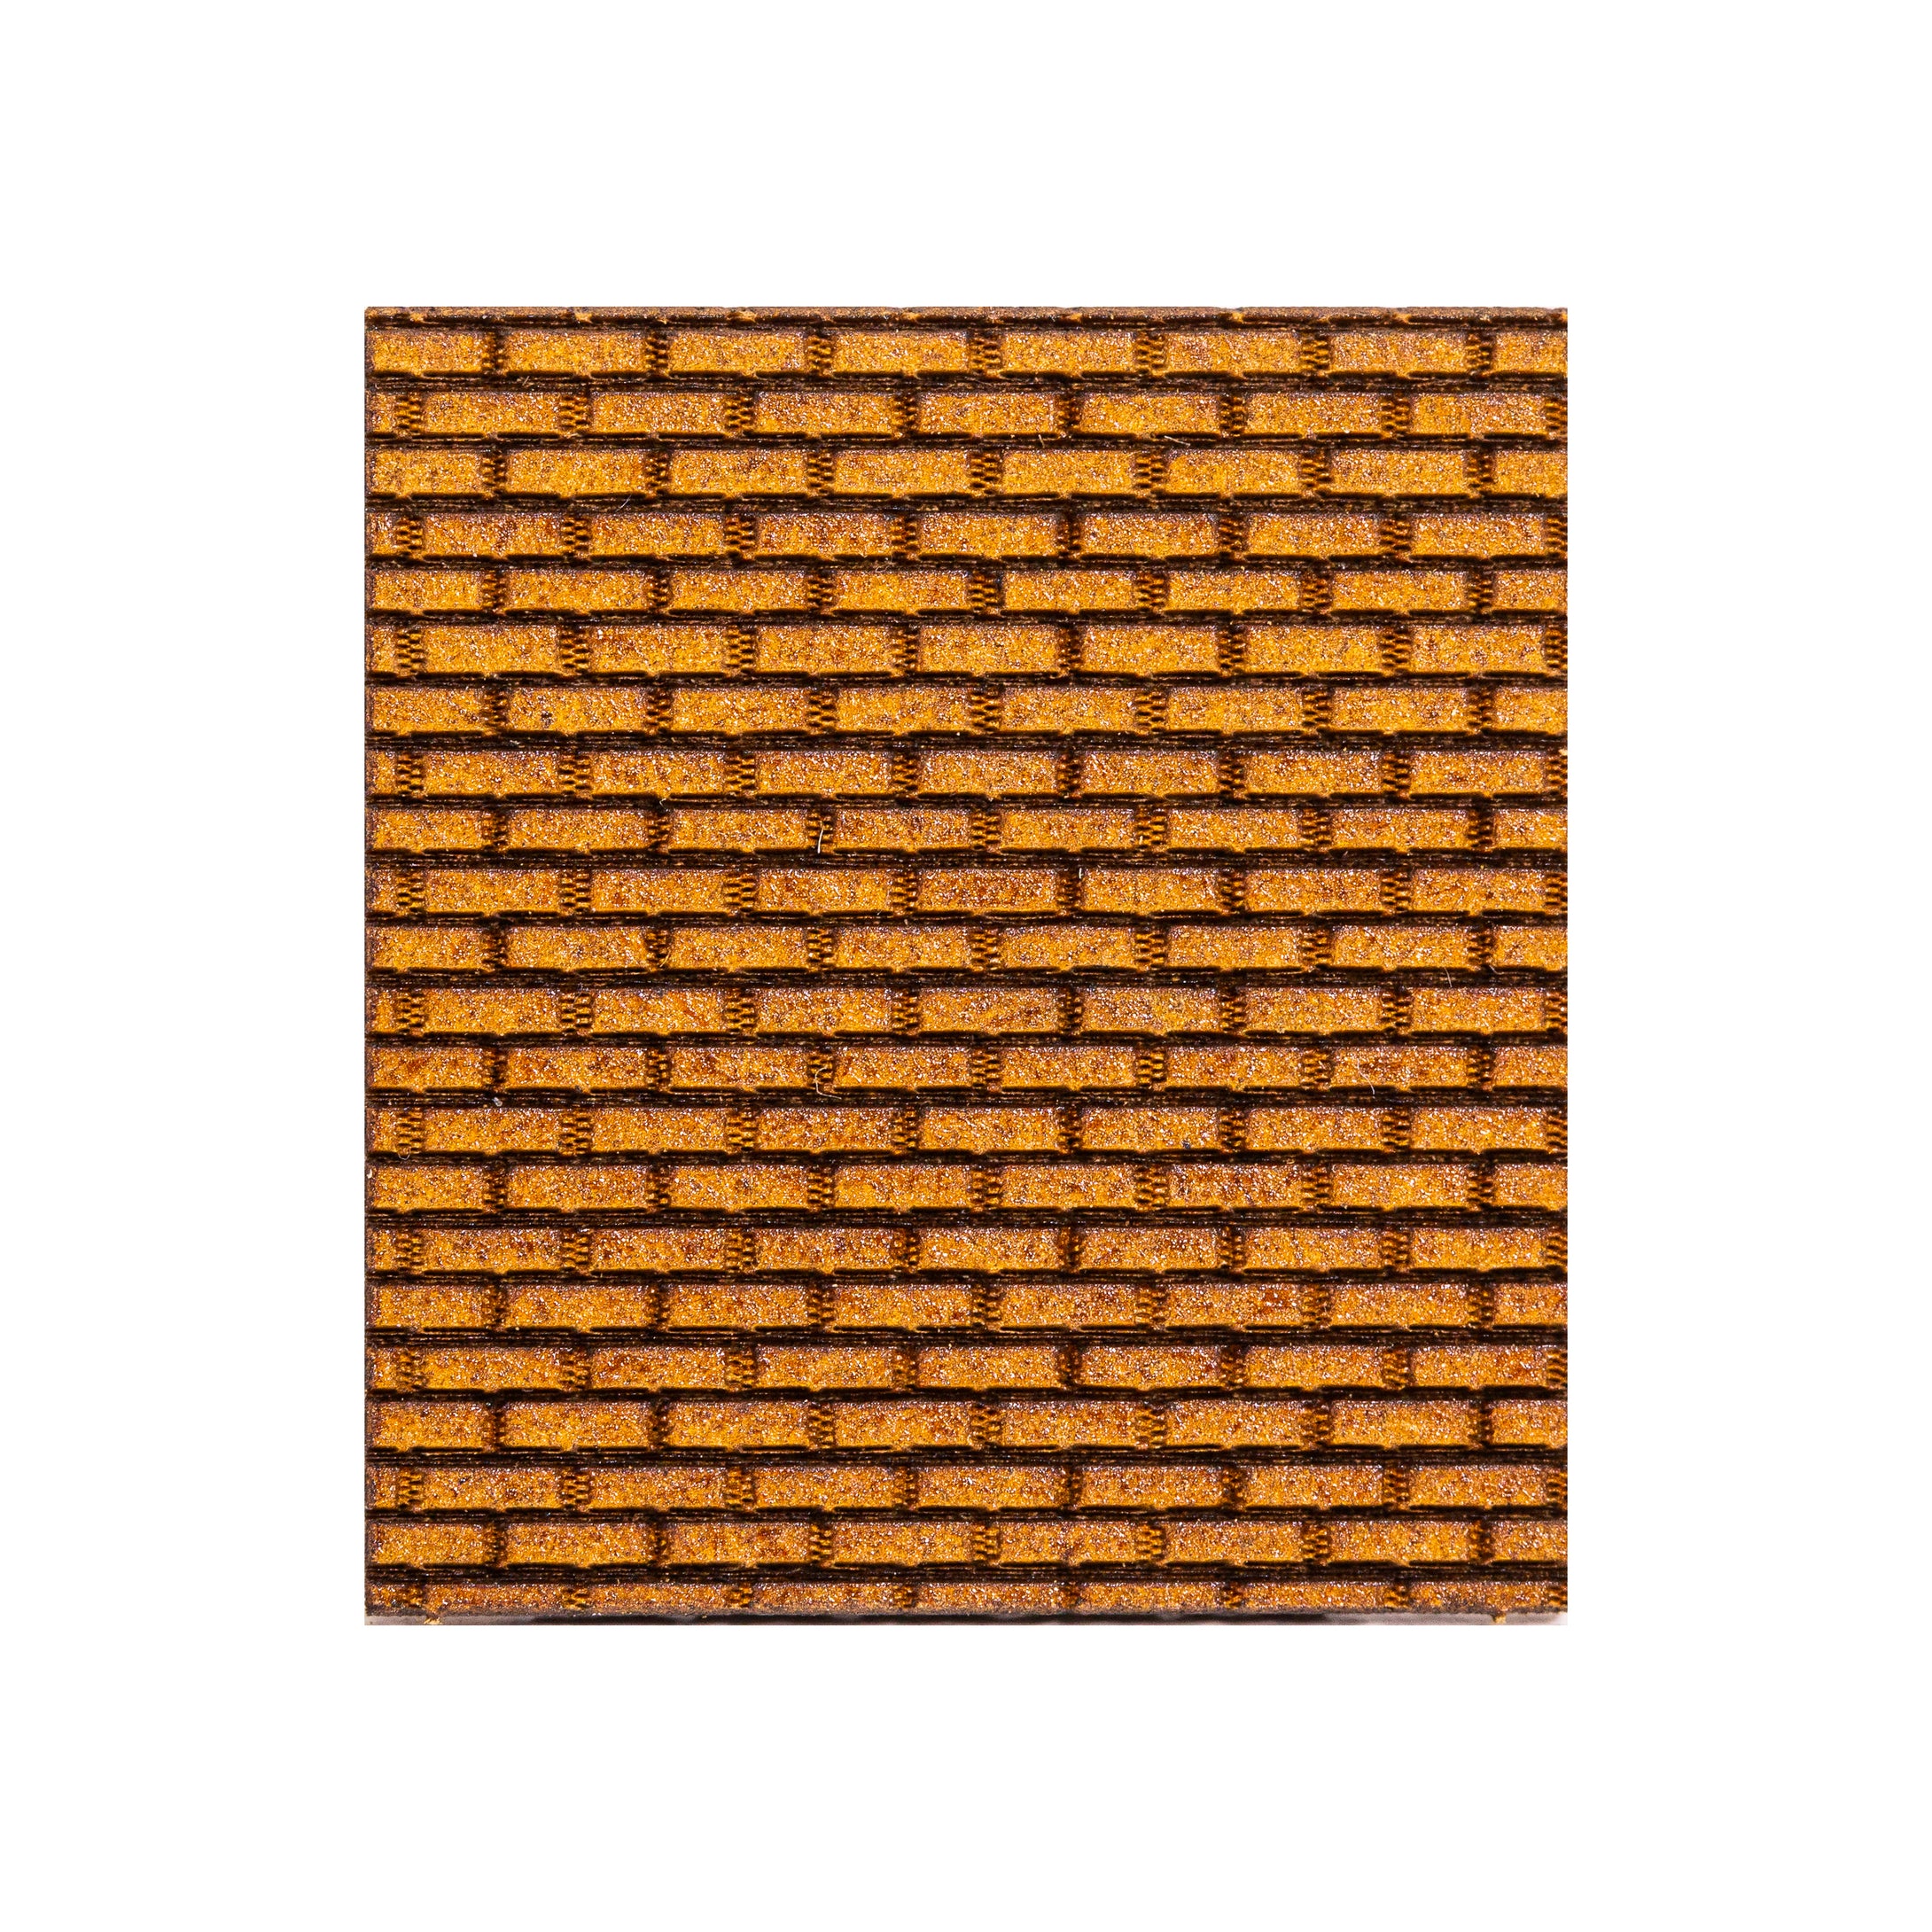 LP142 - HO Scale - Brick panel insert 0 openings - fits opening size F